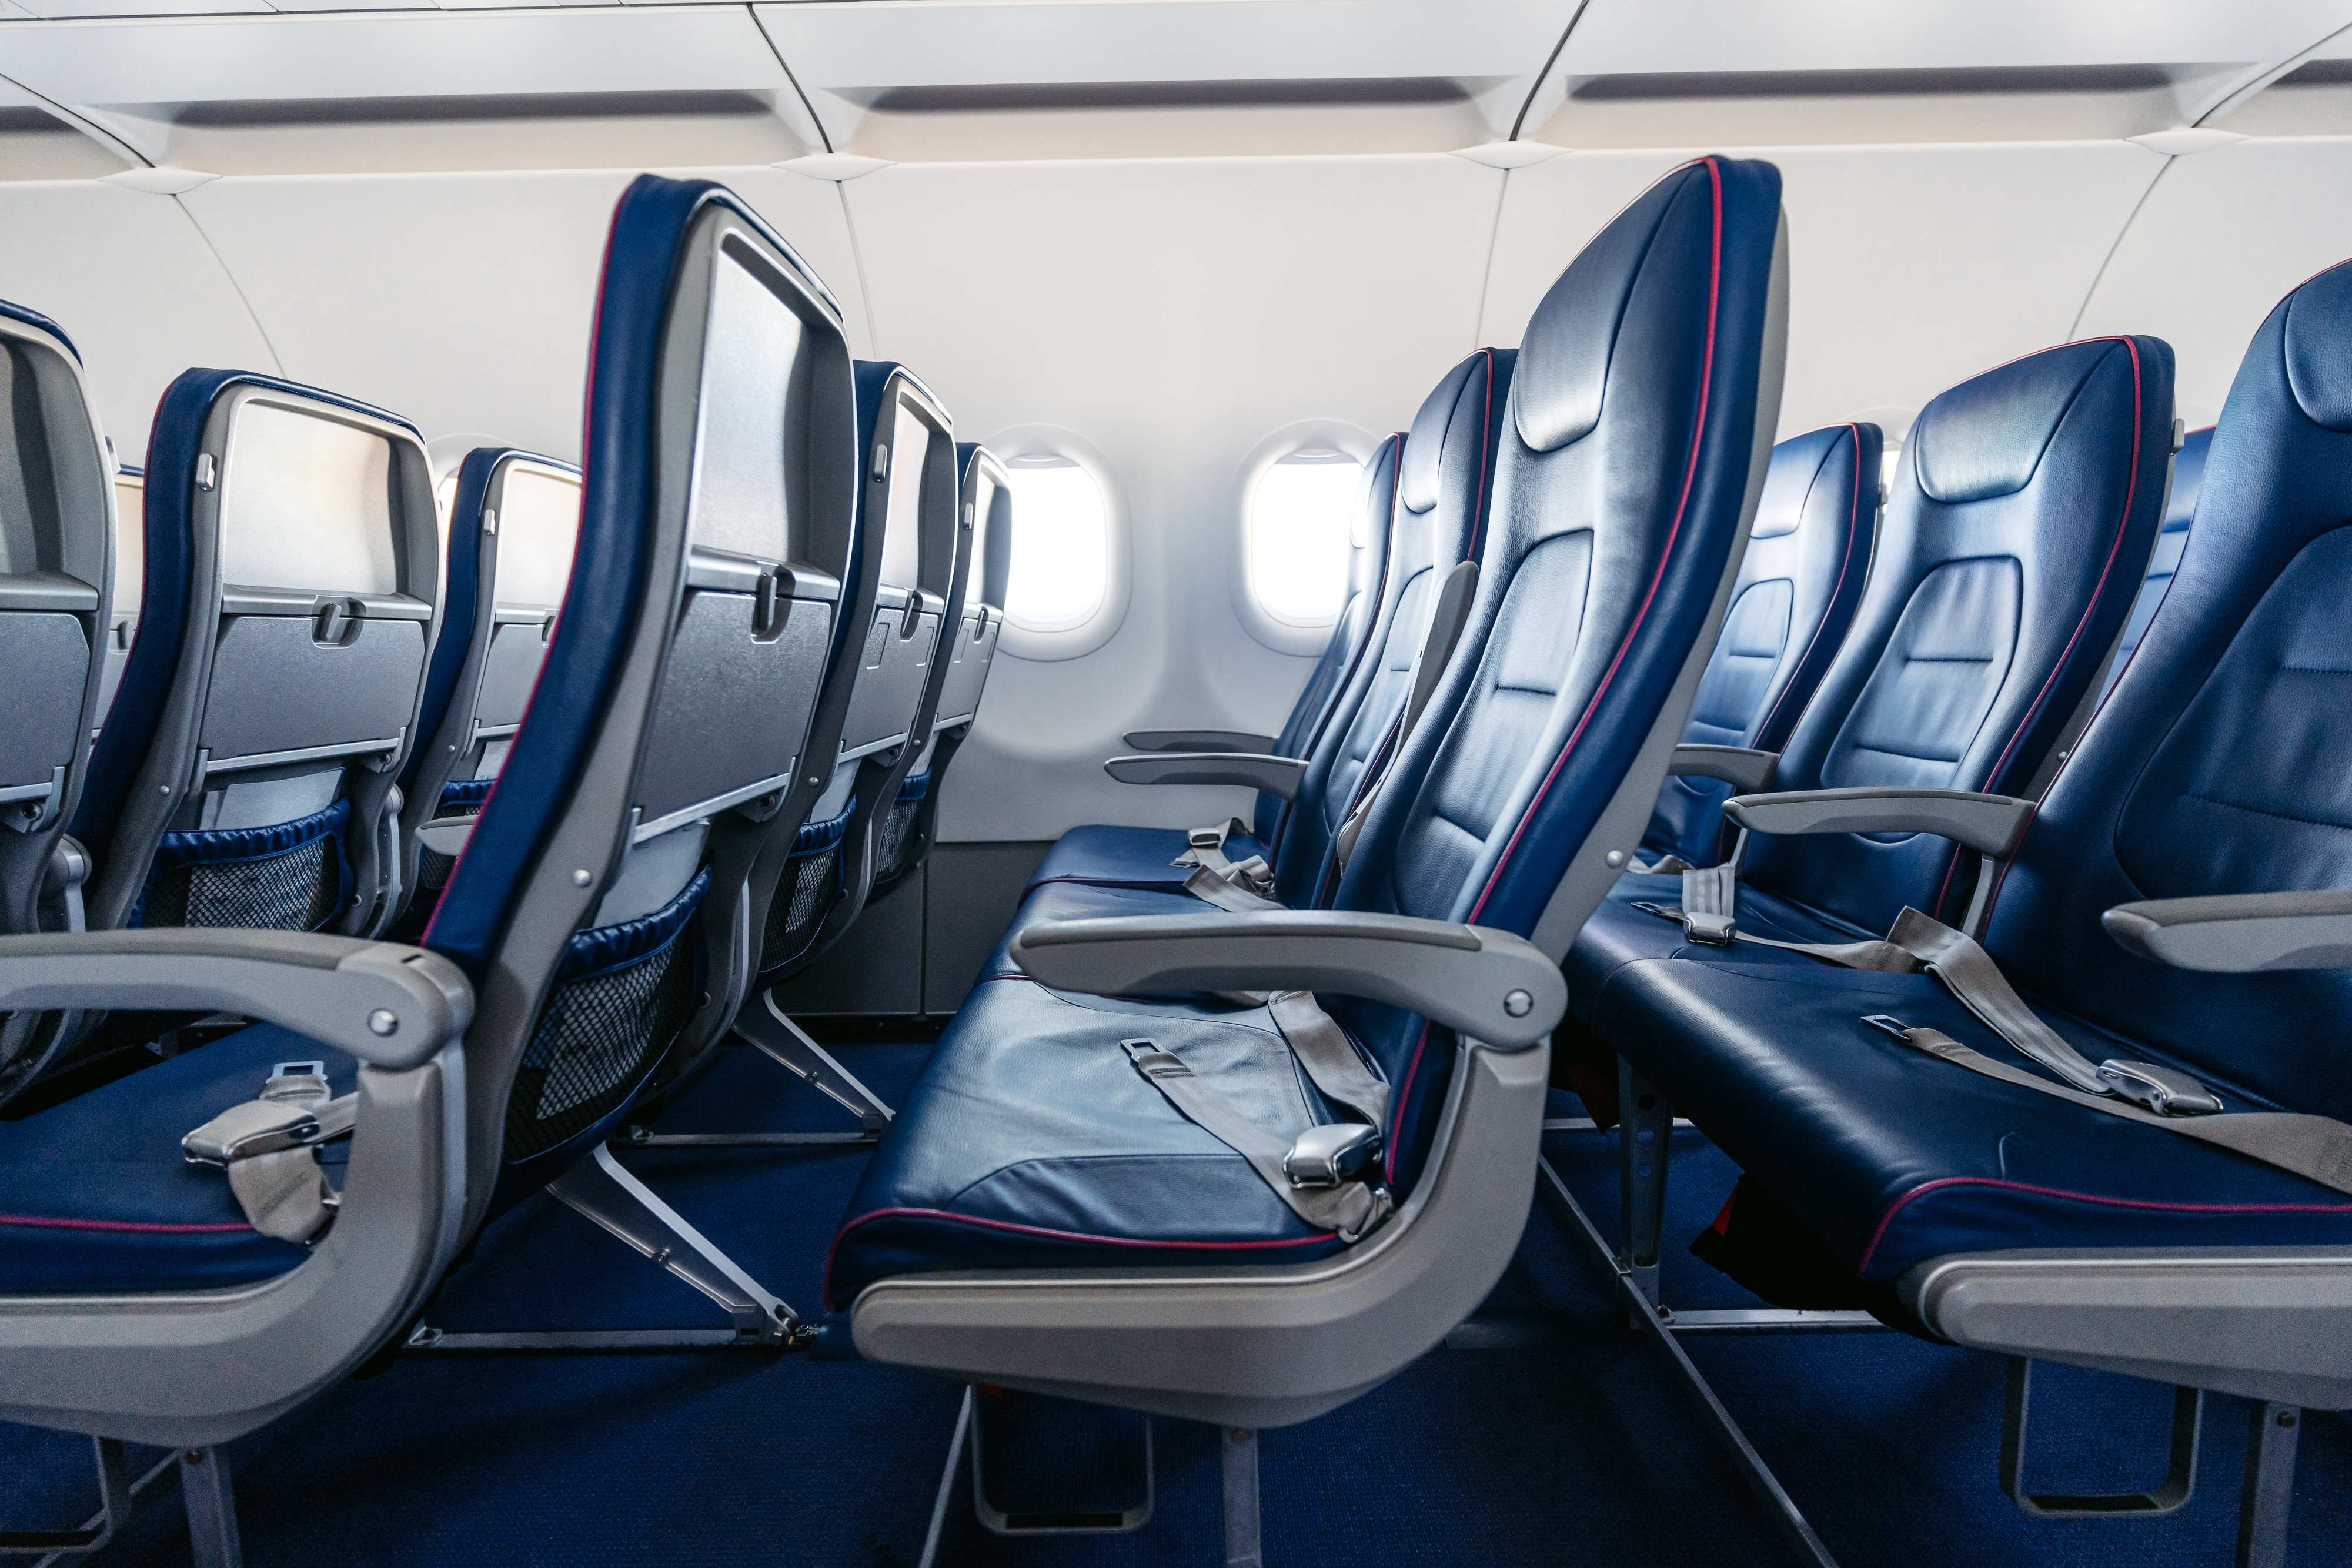 Rows of empty airplane seats with folded tray tables, highlighting travel comfort